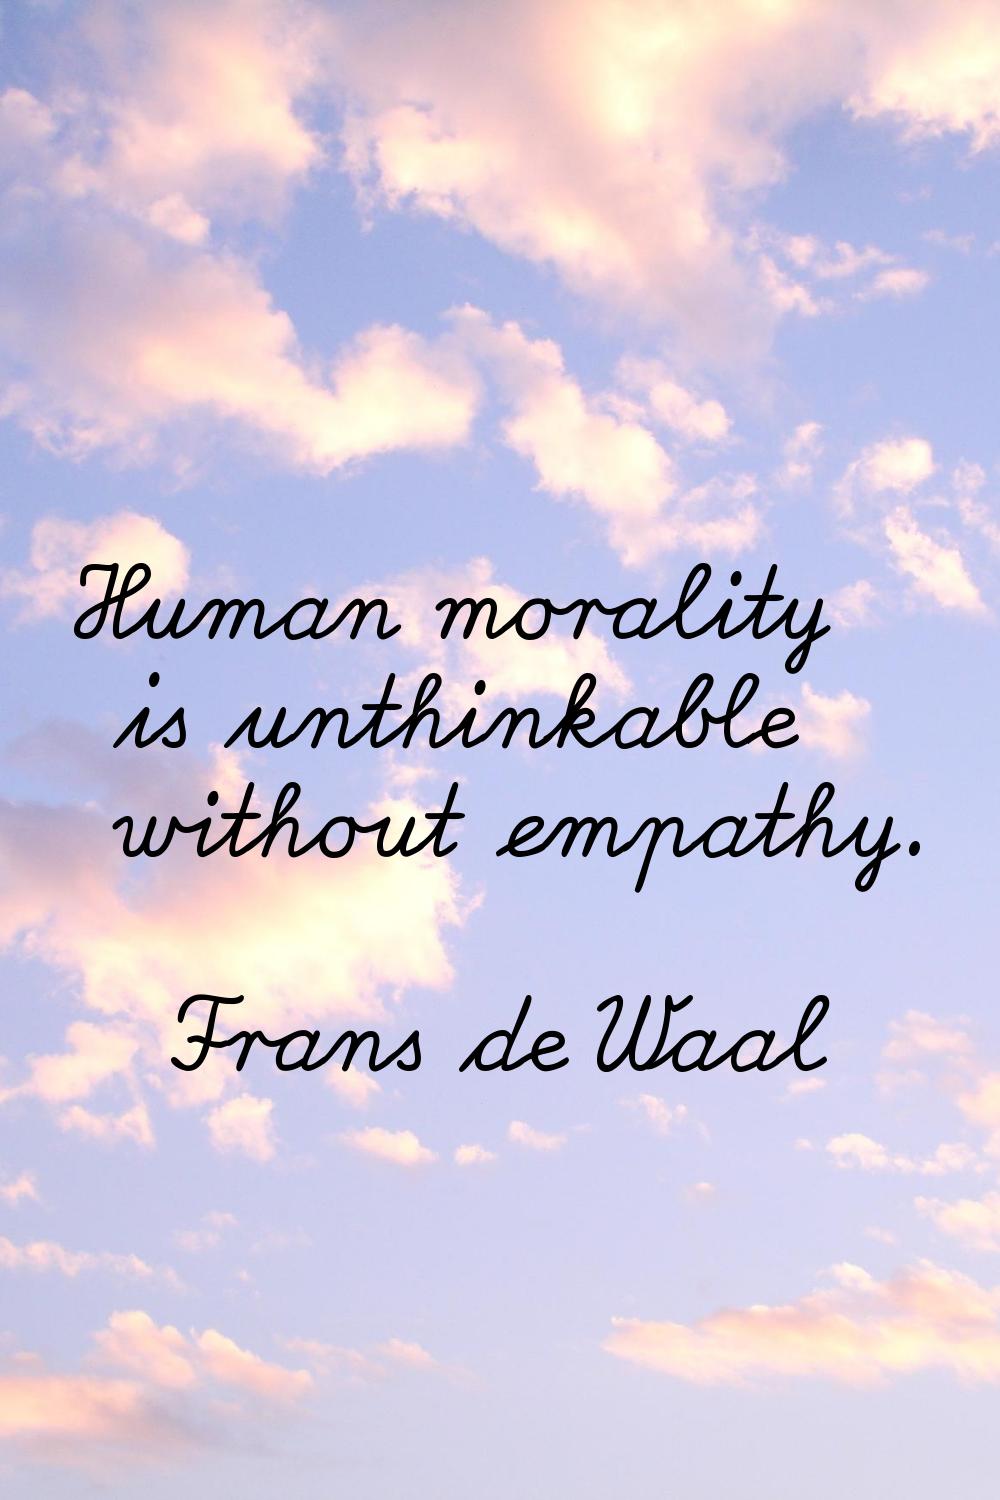 Human morality is unthinkable without empathy.